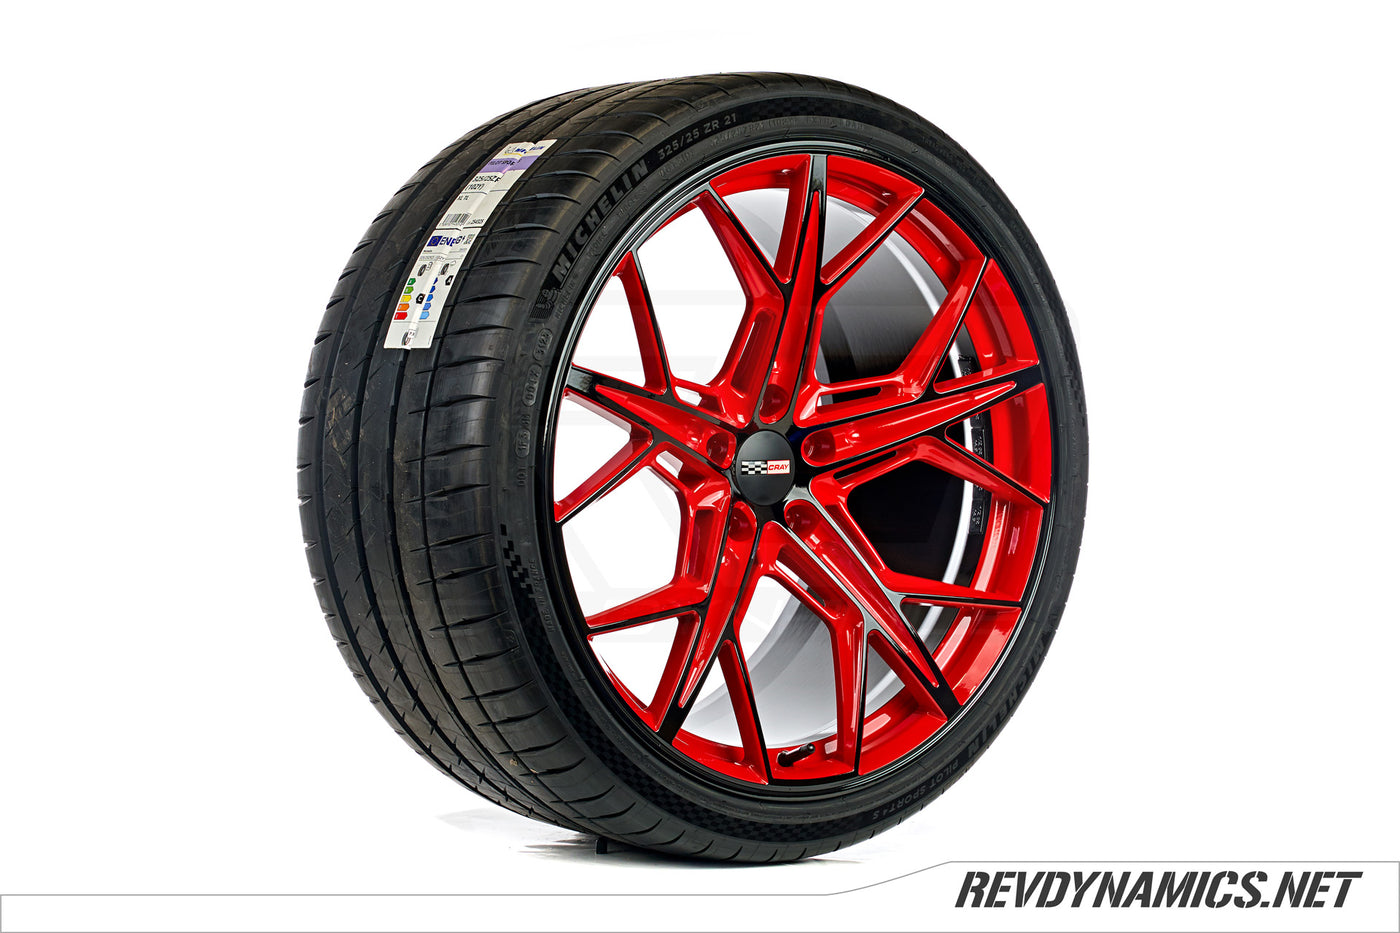 Cray Hammerhead 21" Rim Powdercoated Torch Red and Black Corvette C8 colors 